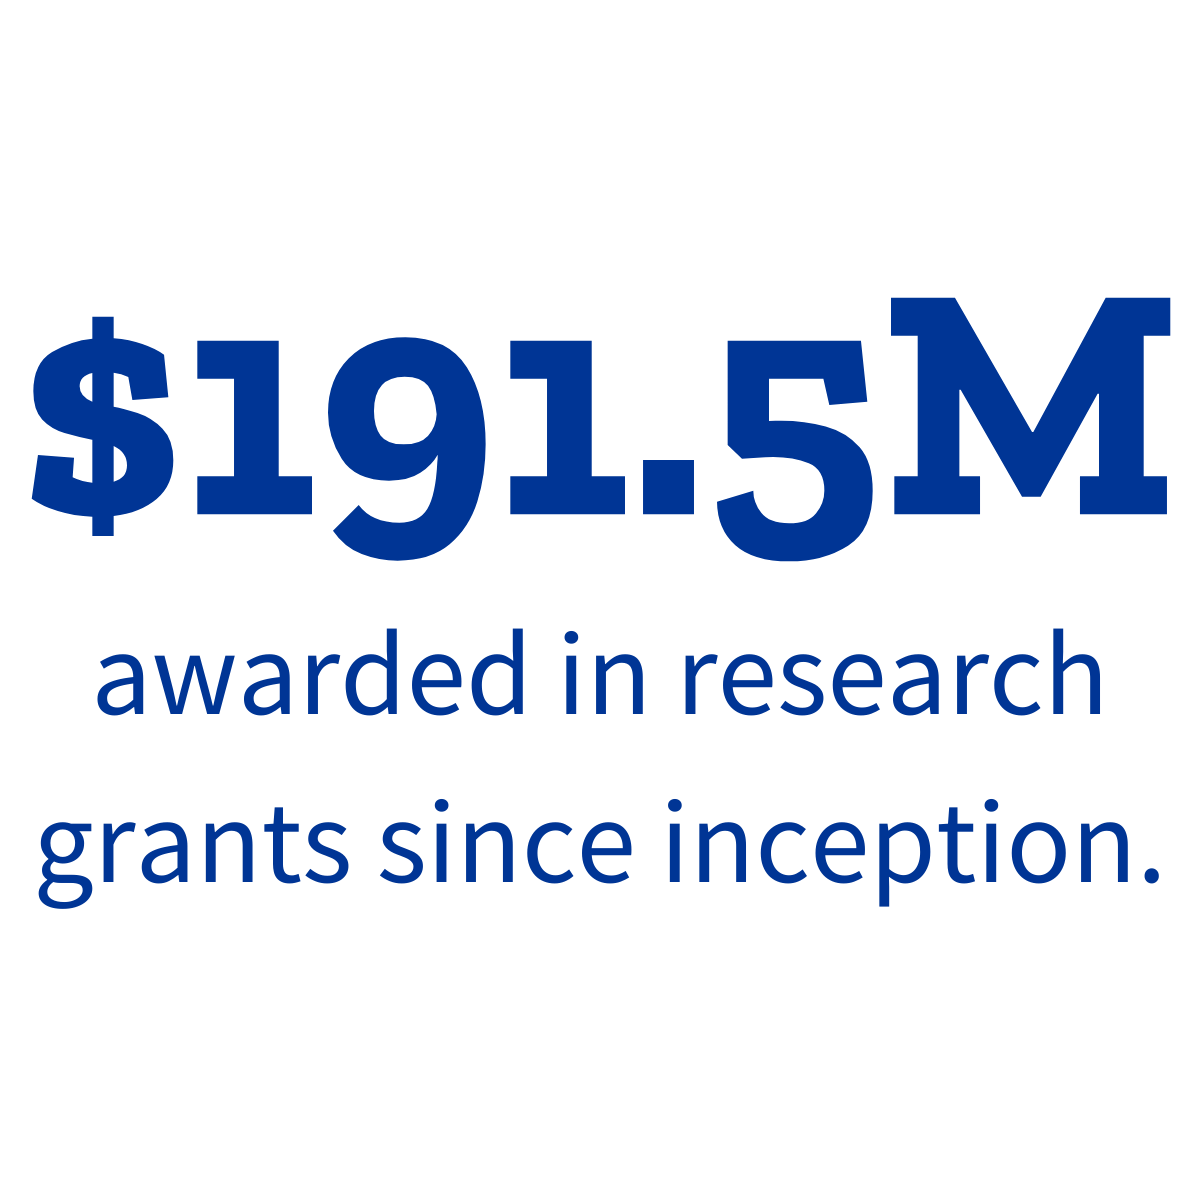 $191.5M awarded in research grants since inception